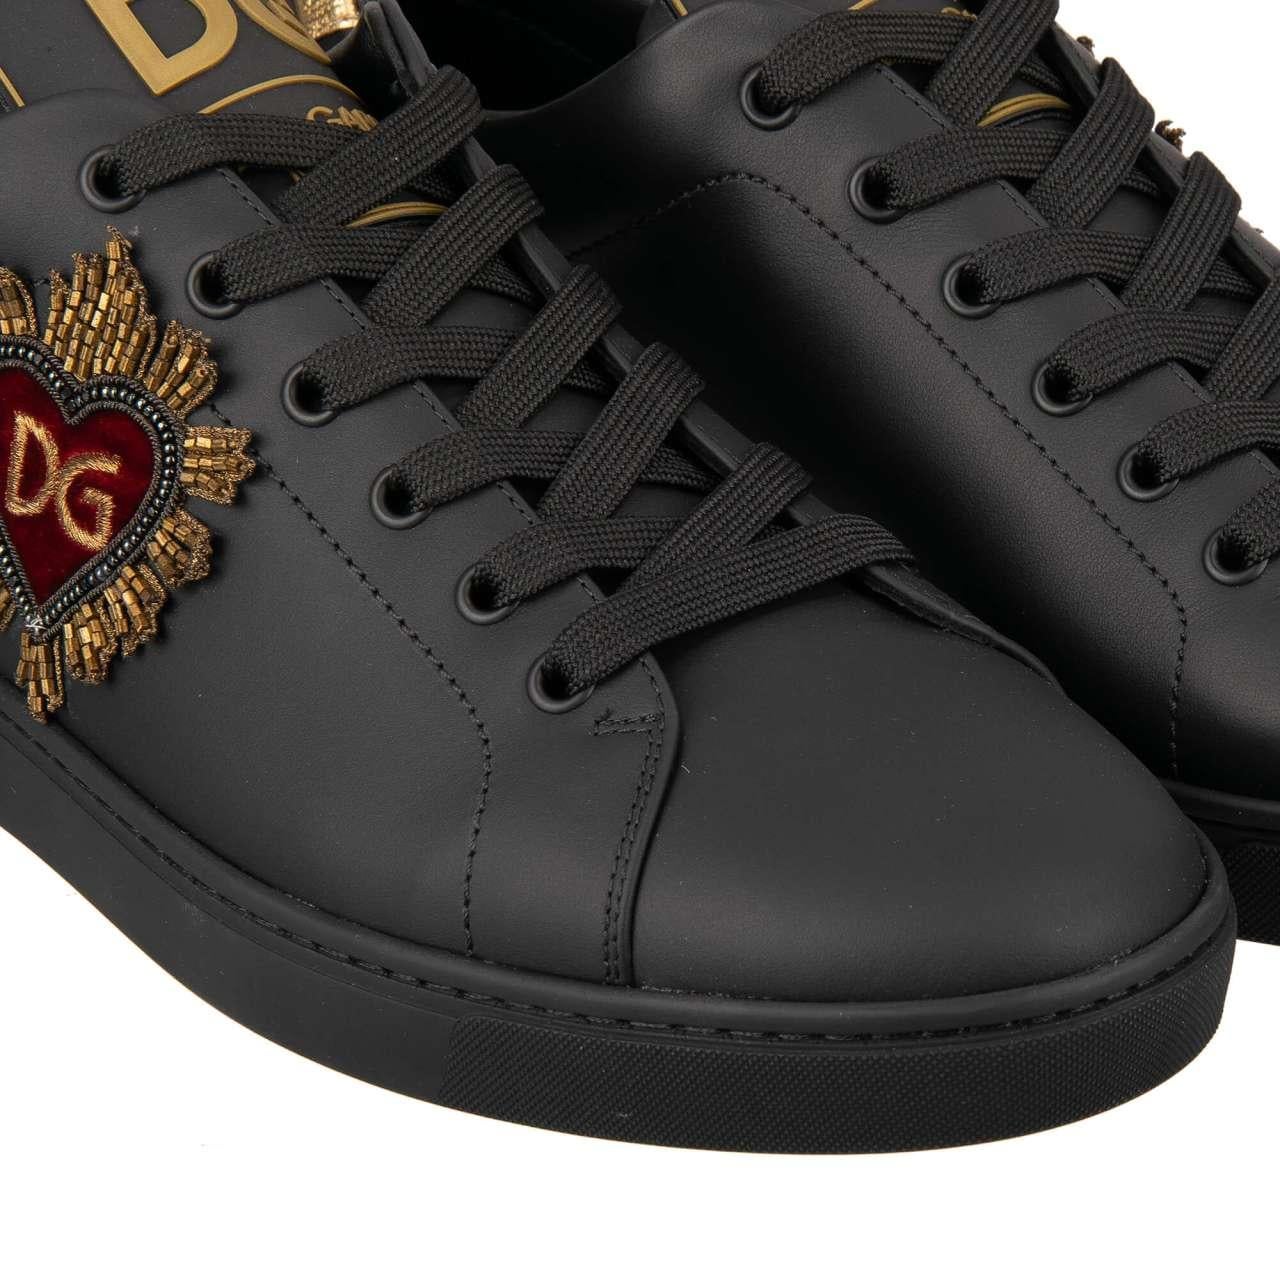 D&G - Low-Top Sneaker LONDON with Logo Heart Embroidery Black Gold EUR 41.5 For Sale 2